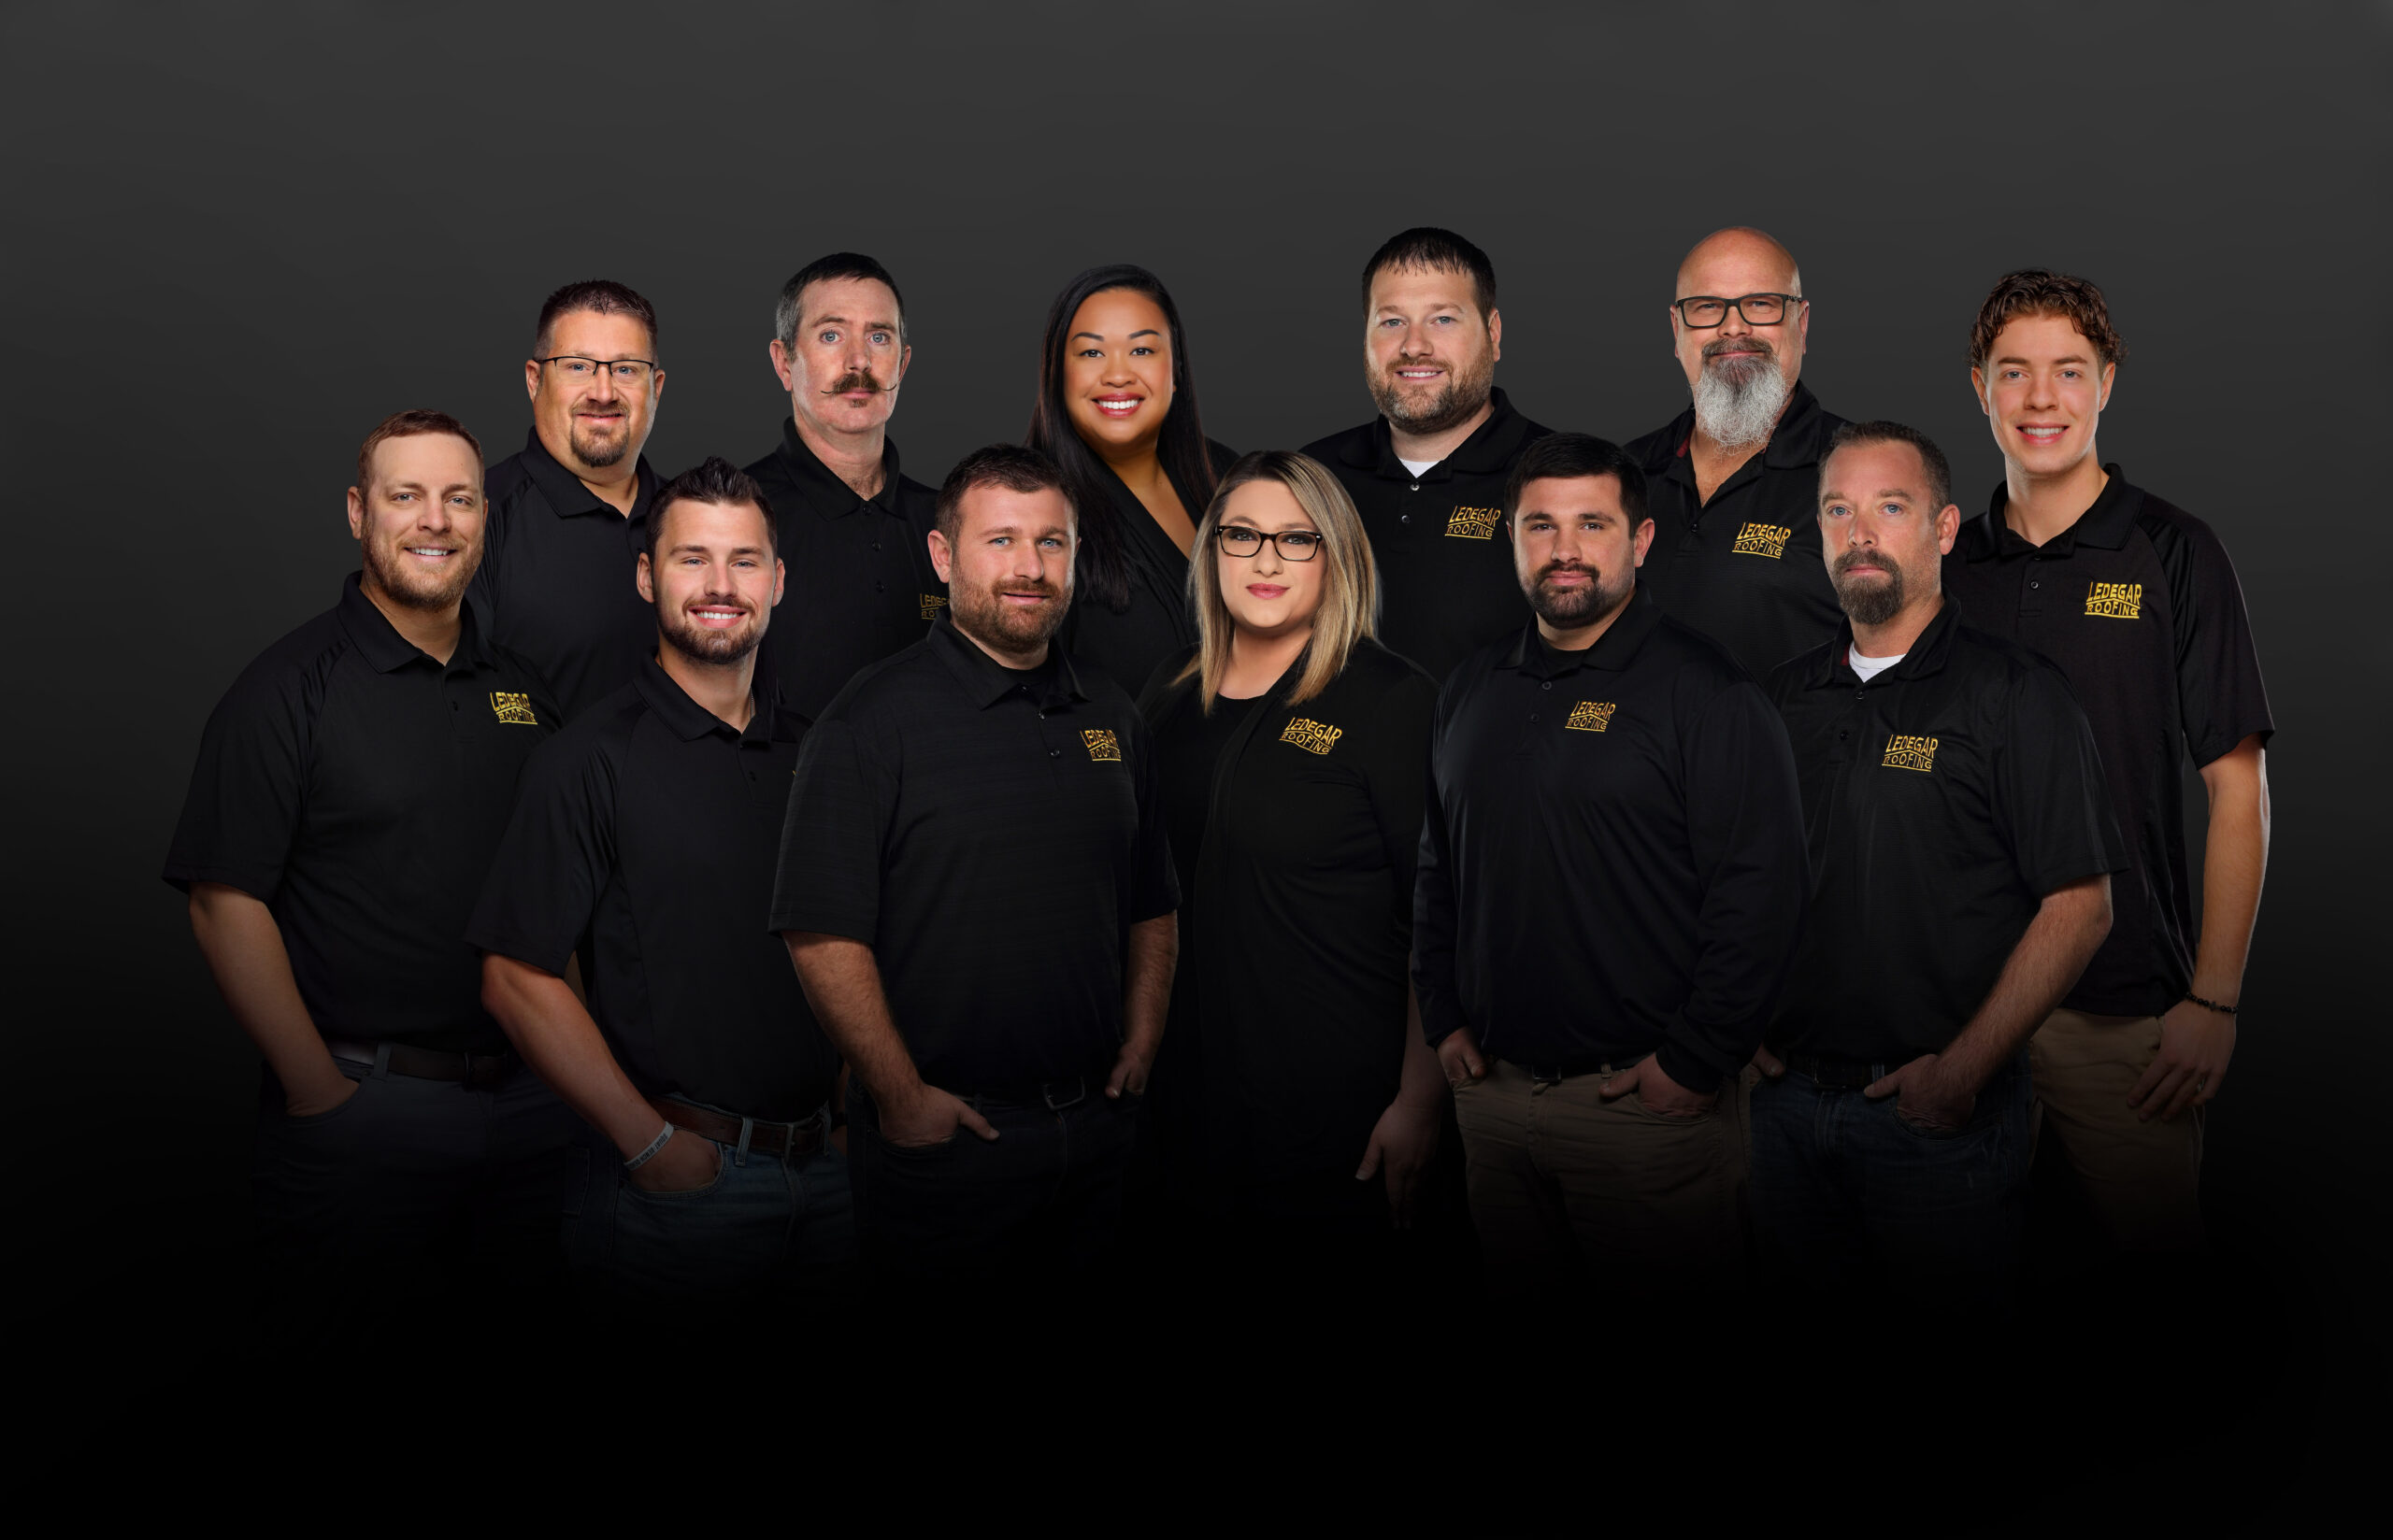 Group photo of Ledegar Roofing's employees.